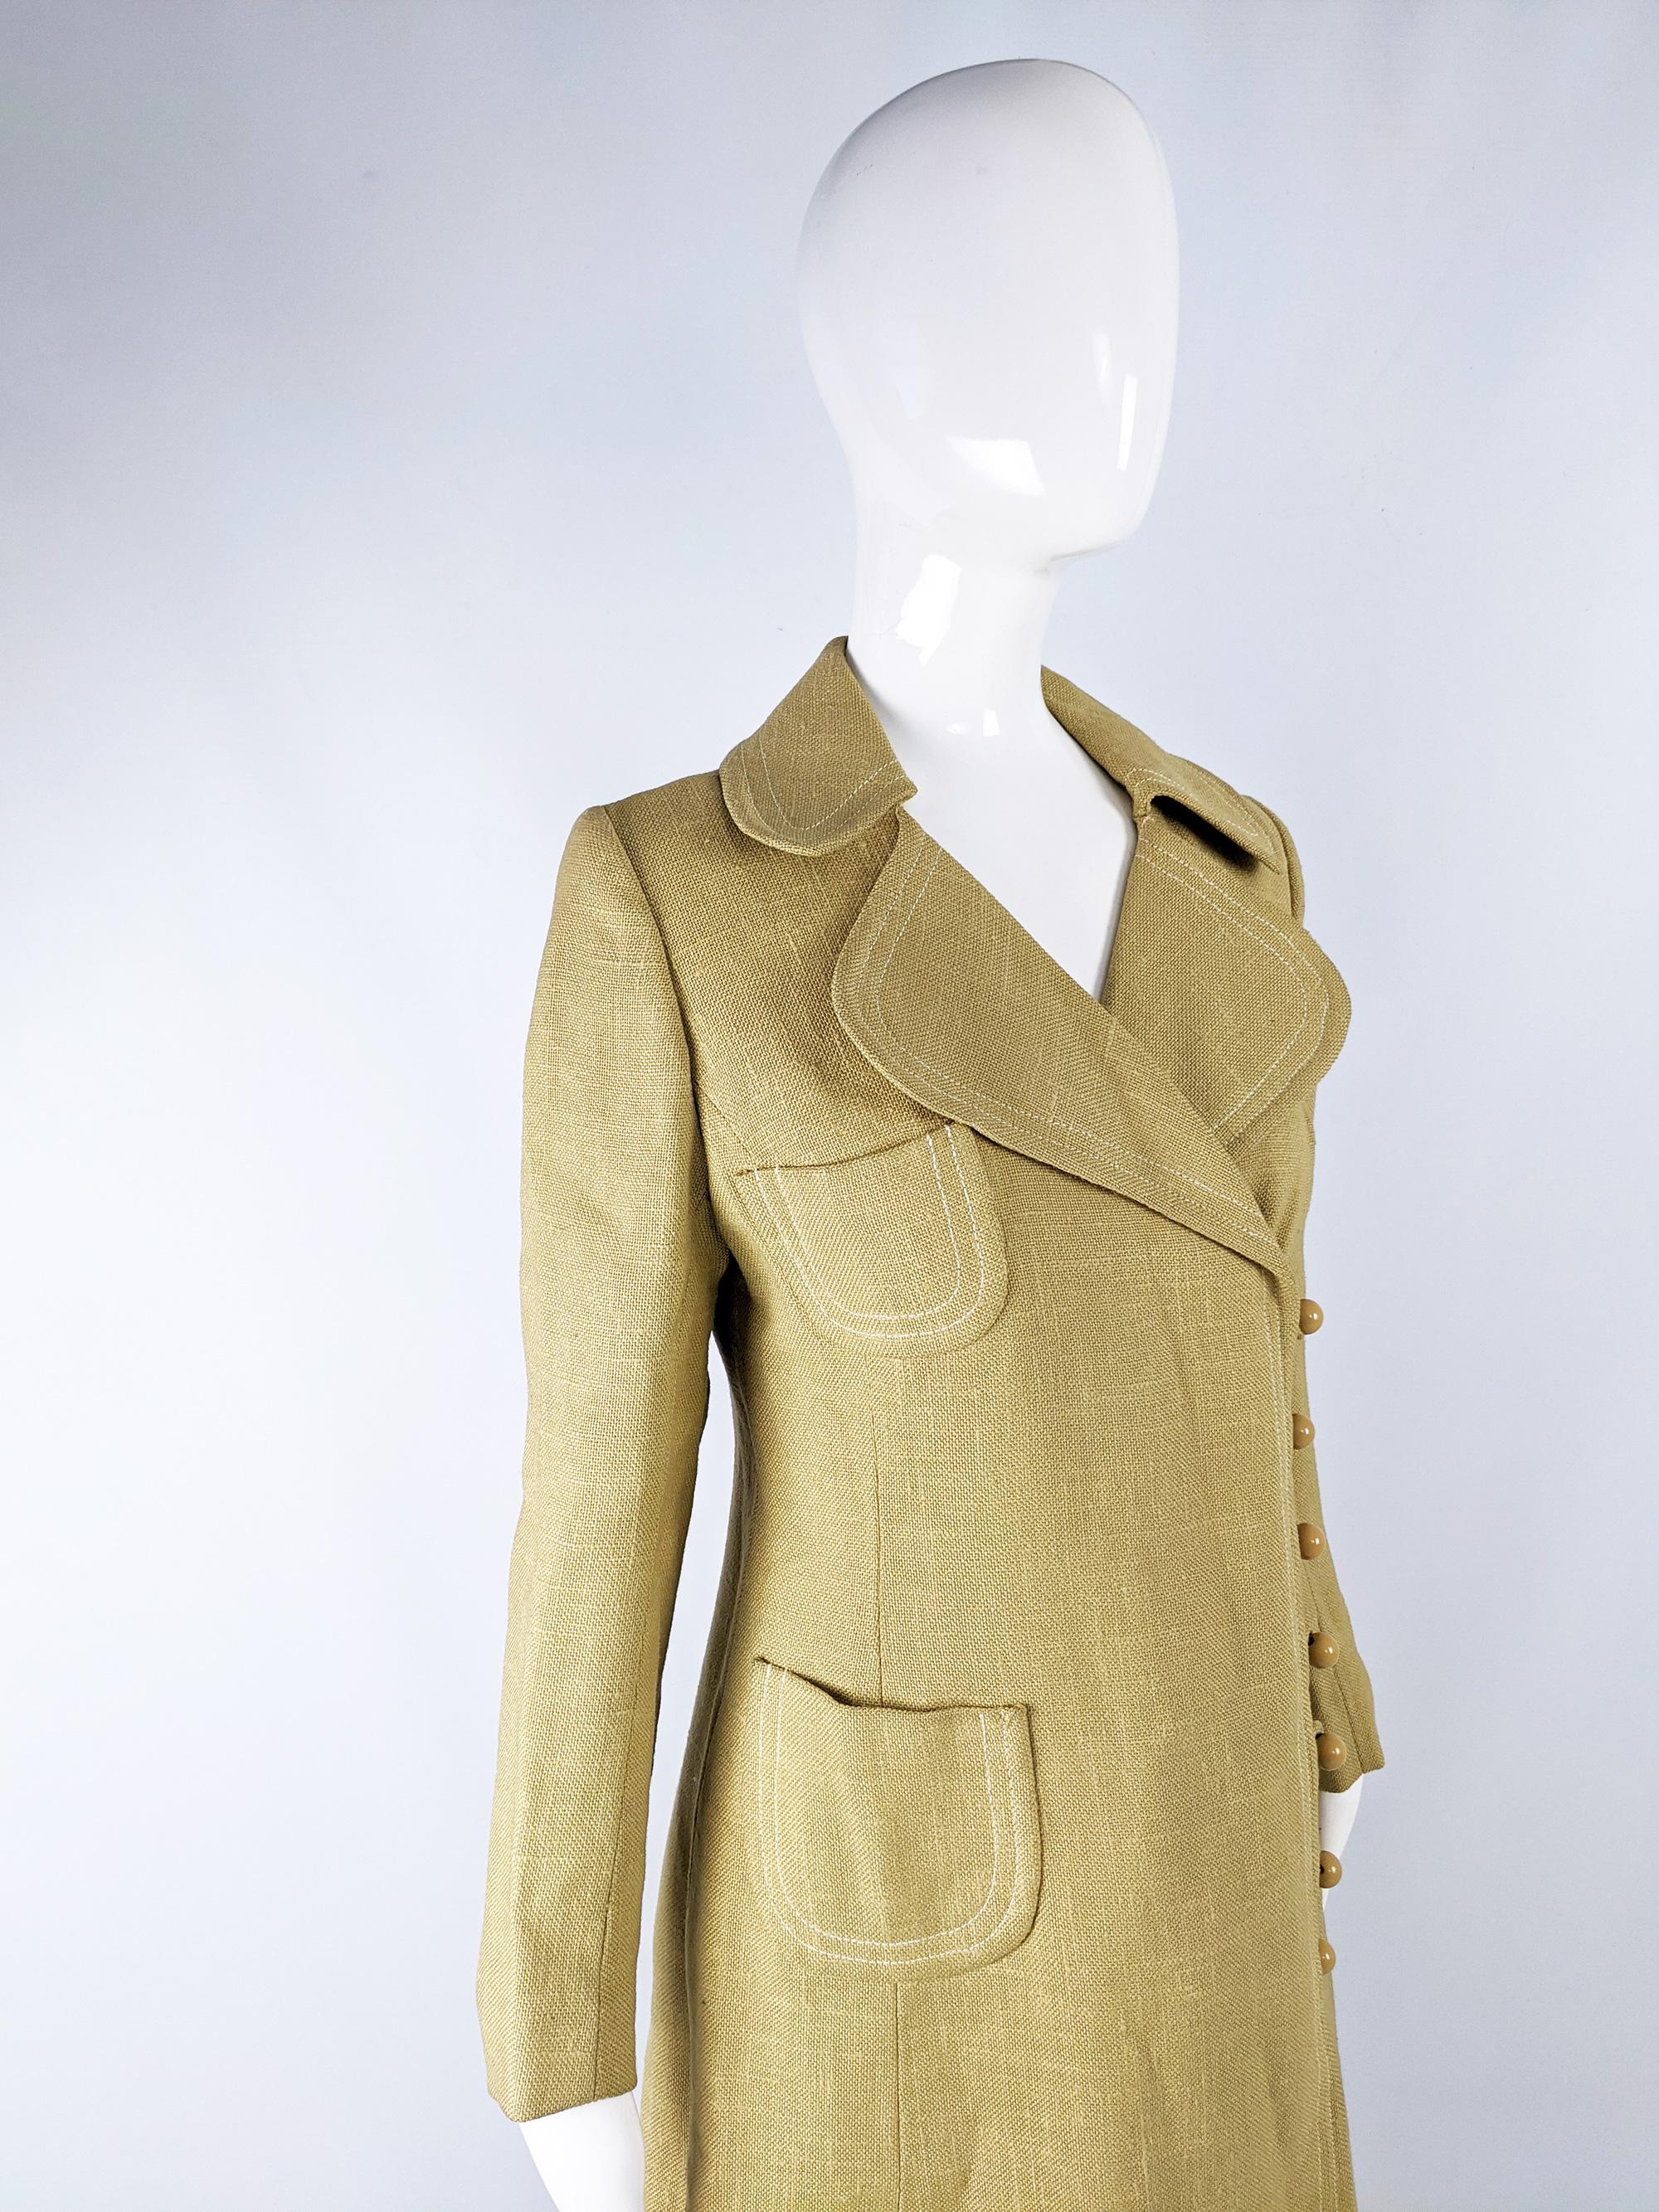 Vintage 1960s Yellow Linen Mod Coat In Excellent Condition For Sale In Doncaster, South Yorkshire